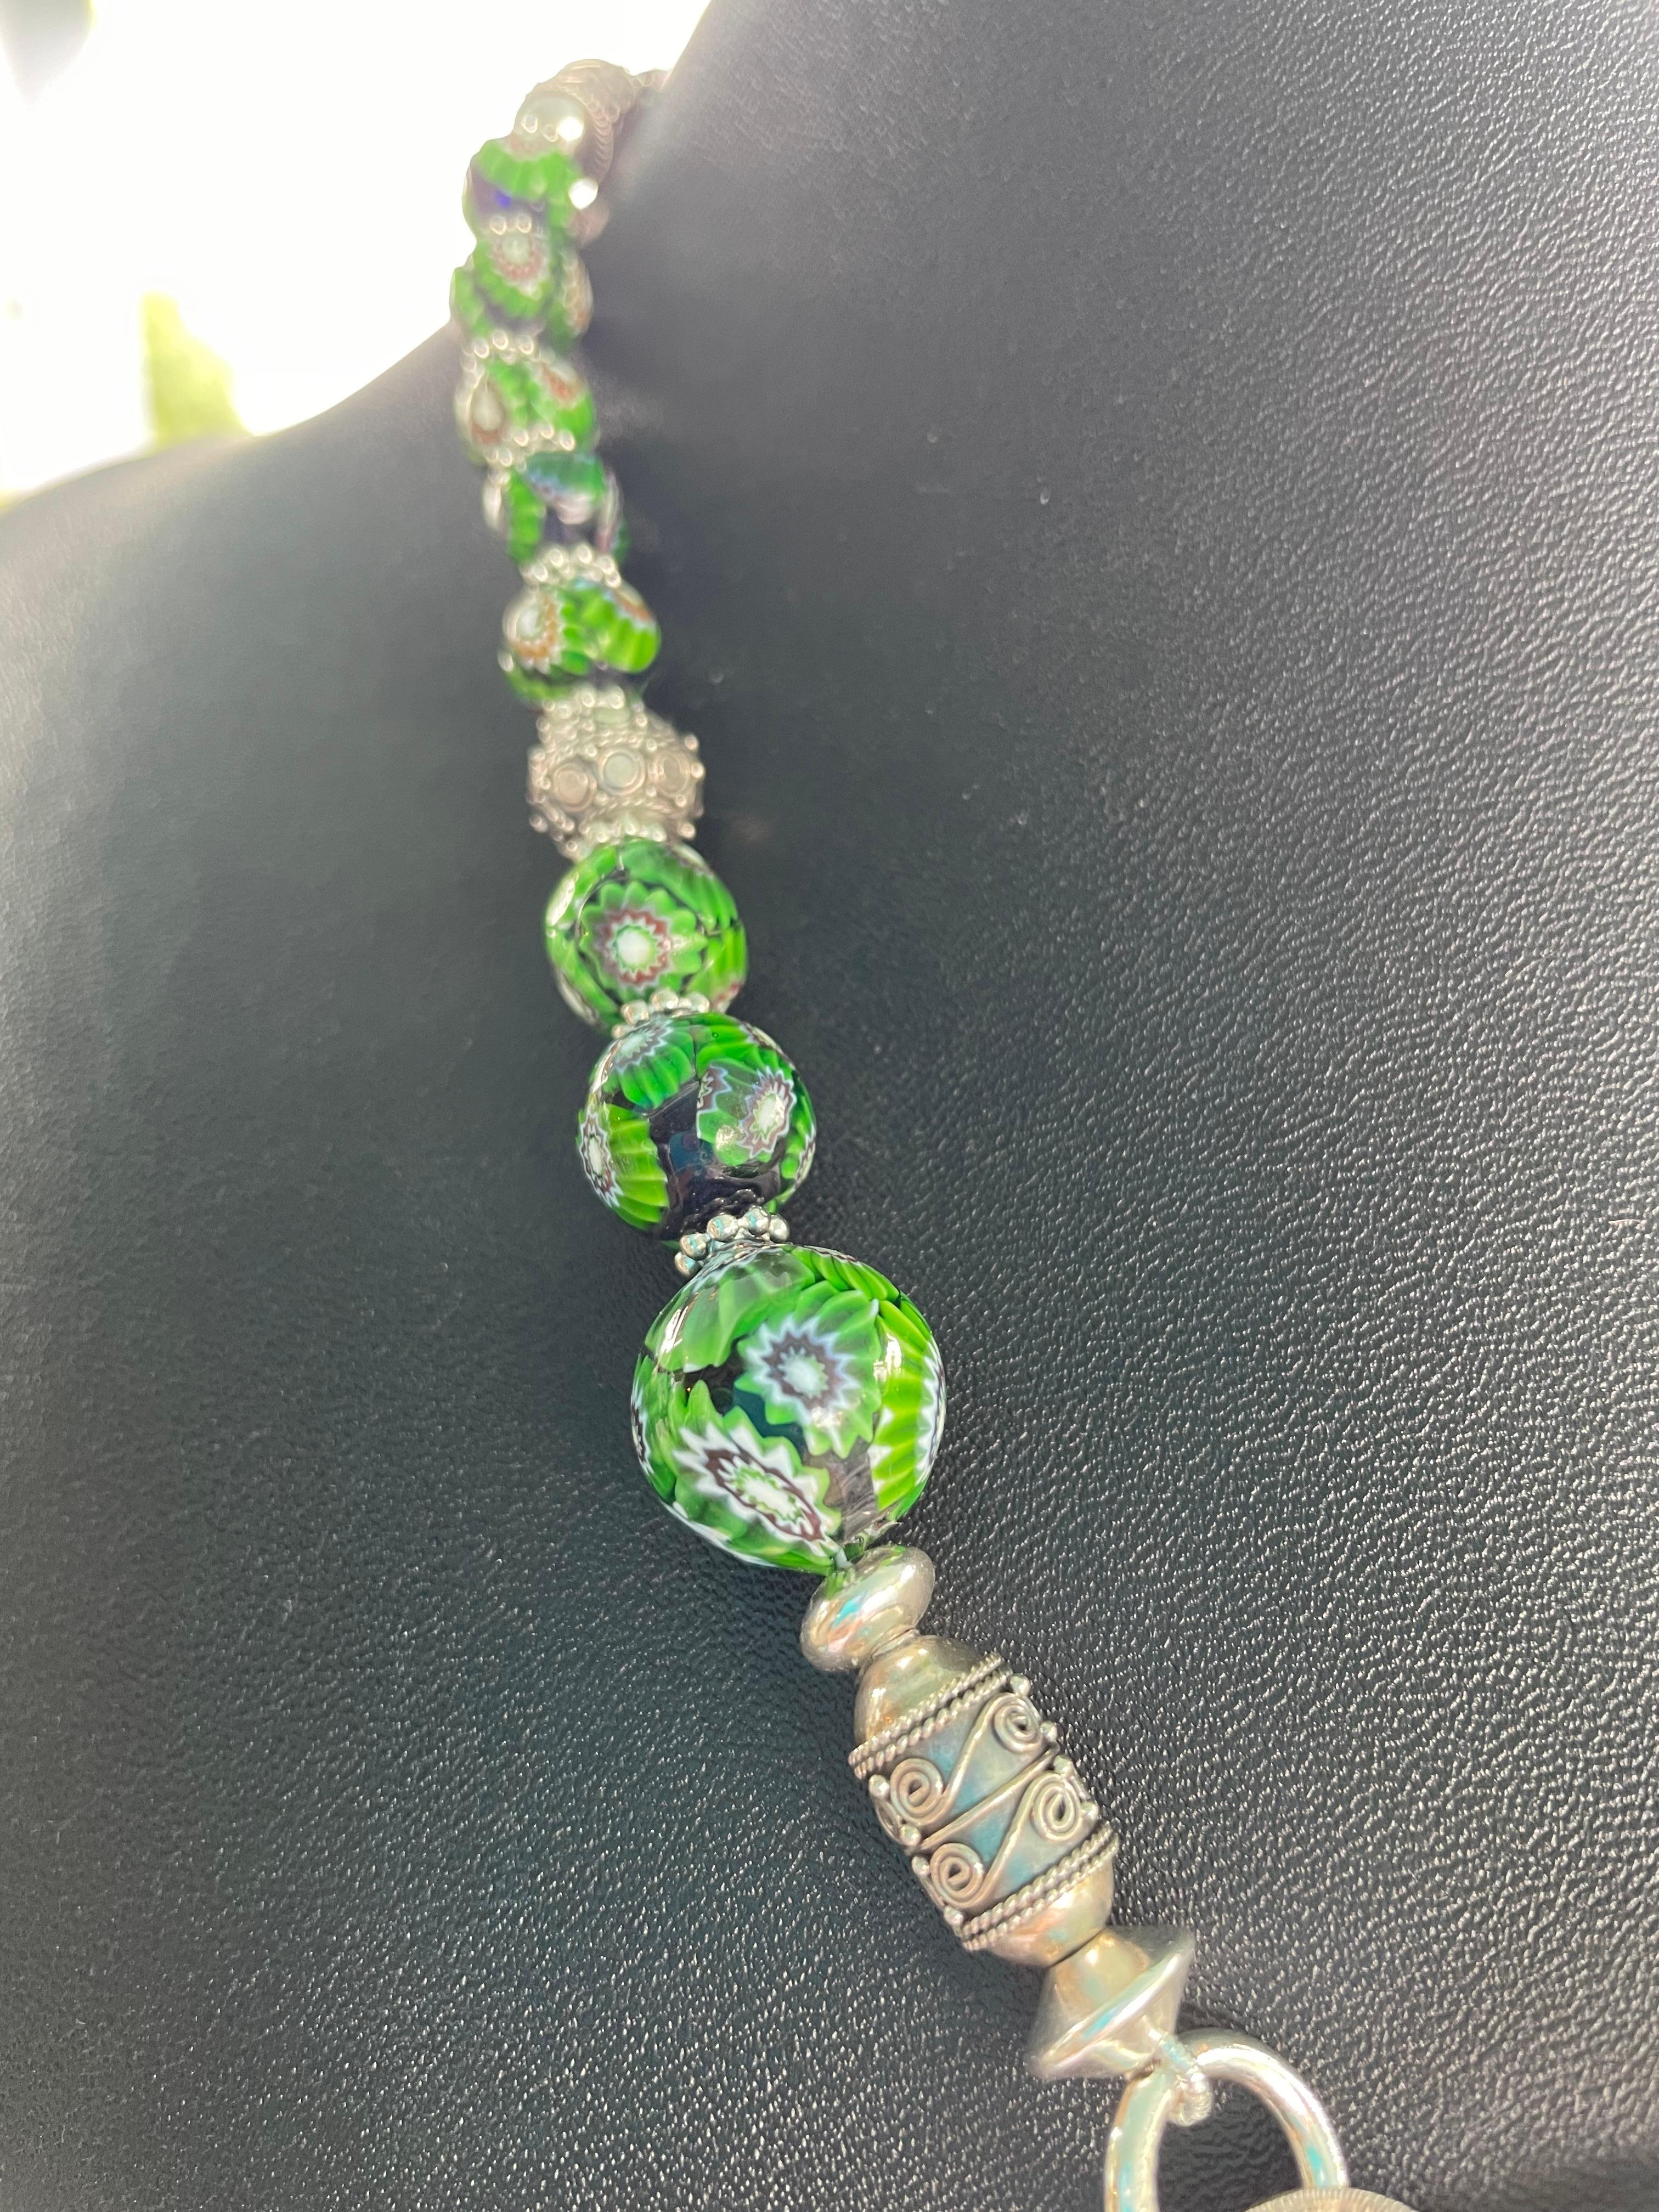 Offering a Vintage Art Deco sterling silver brooch, with a vintage SS and marcasite pin. This is of a one of a kind handmade, statement necklace.,with vintage green Venetian beads and sterling silver beads. This piece is handmade . 

